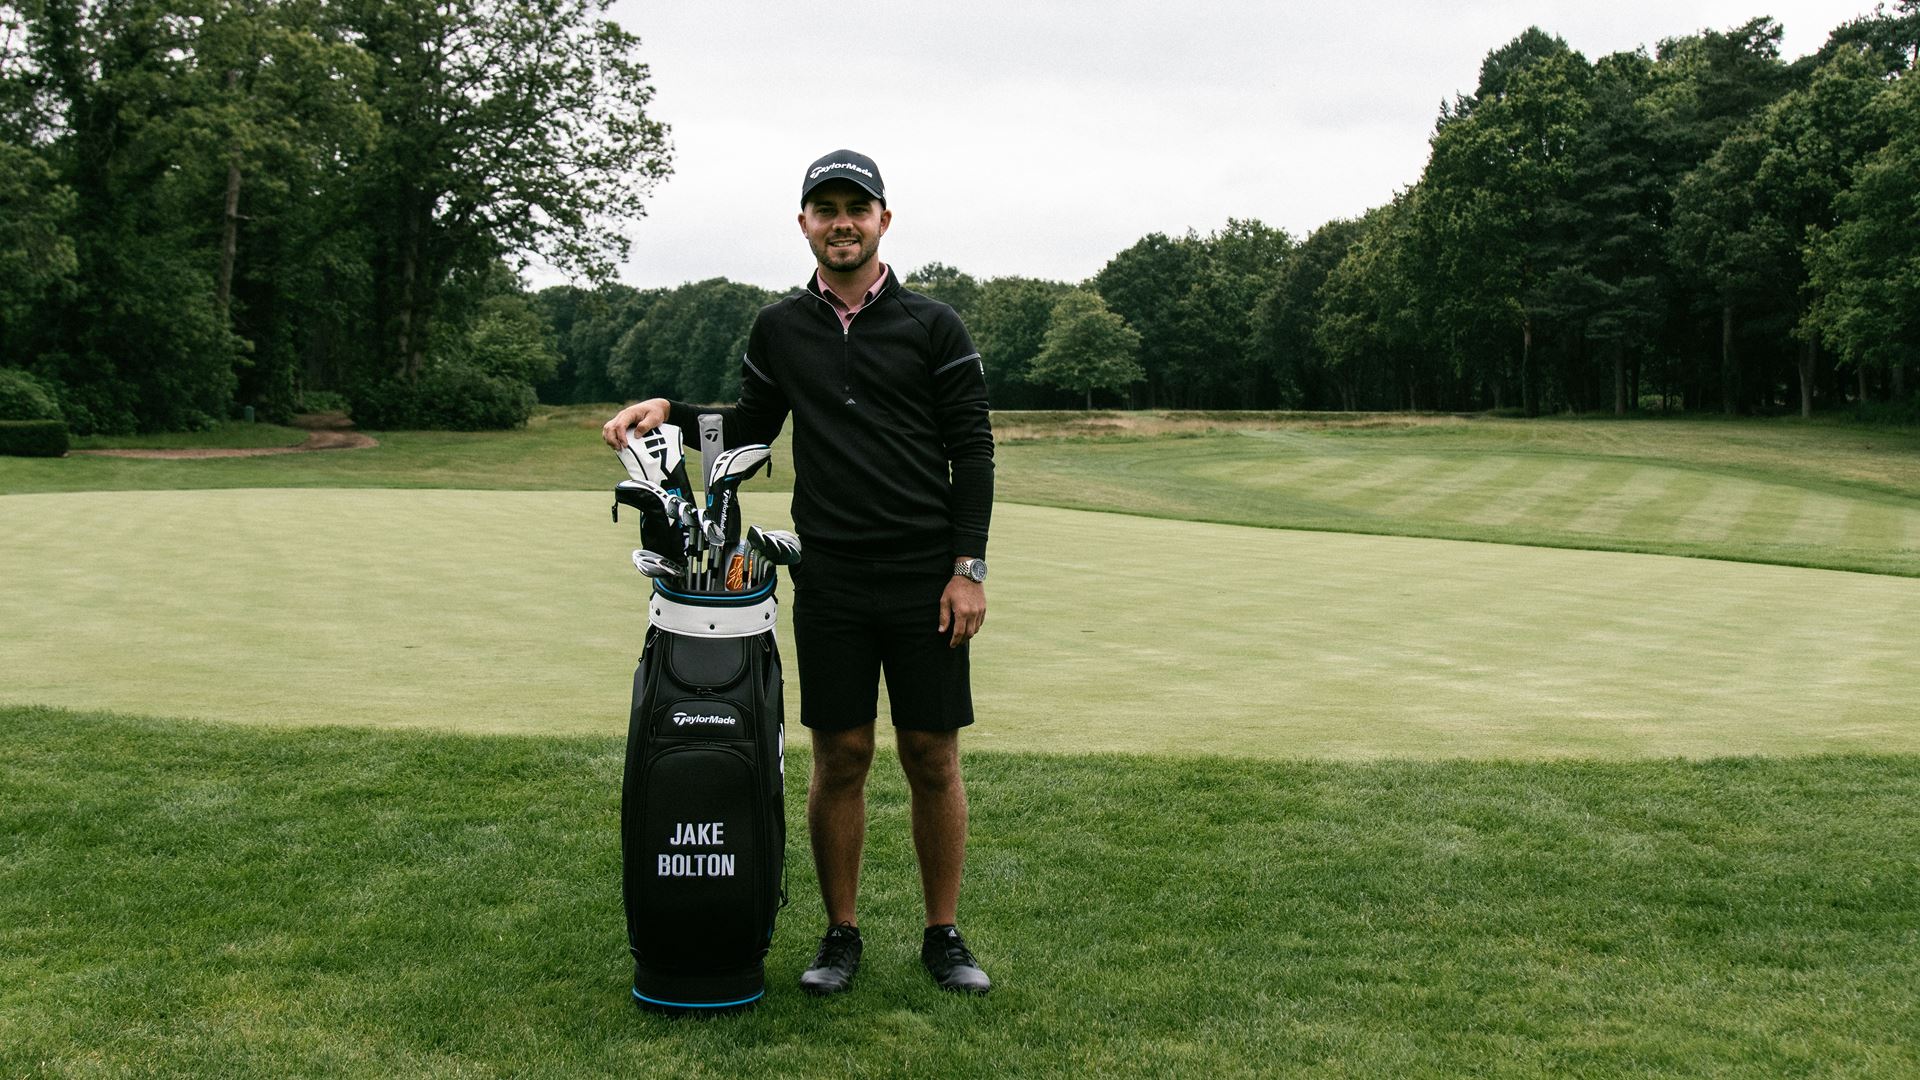 Jake Bolton Joins Team TaylorMade, Choosing To Play A Full Bag of TaylorMade Equipment and Golf Ball